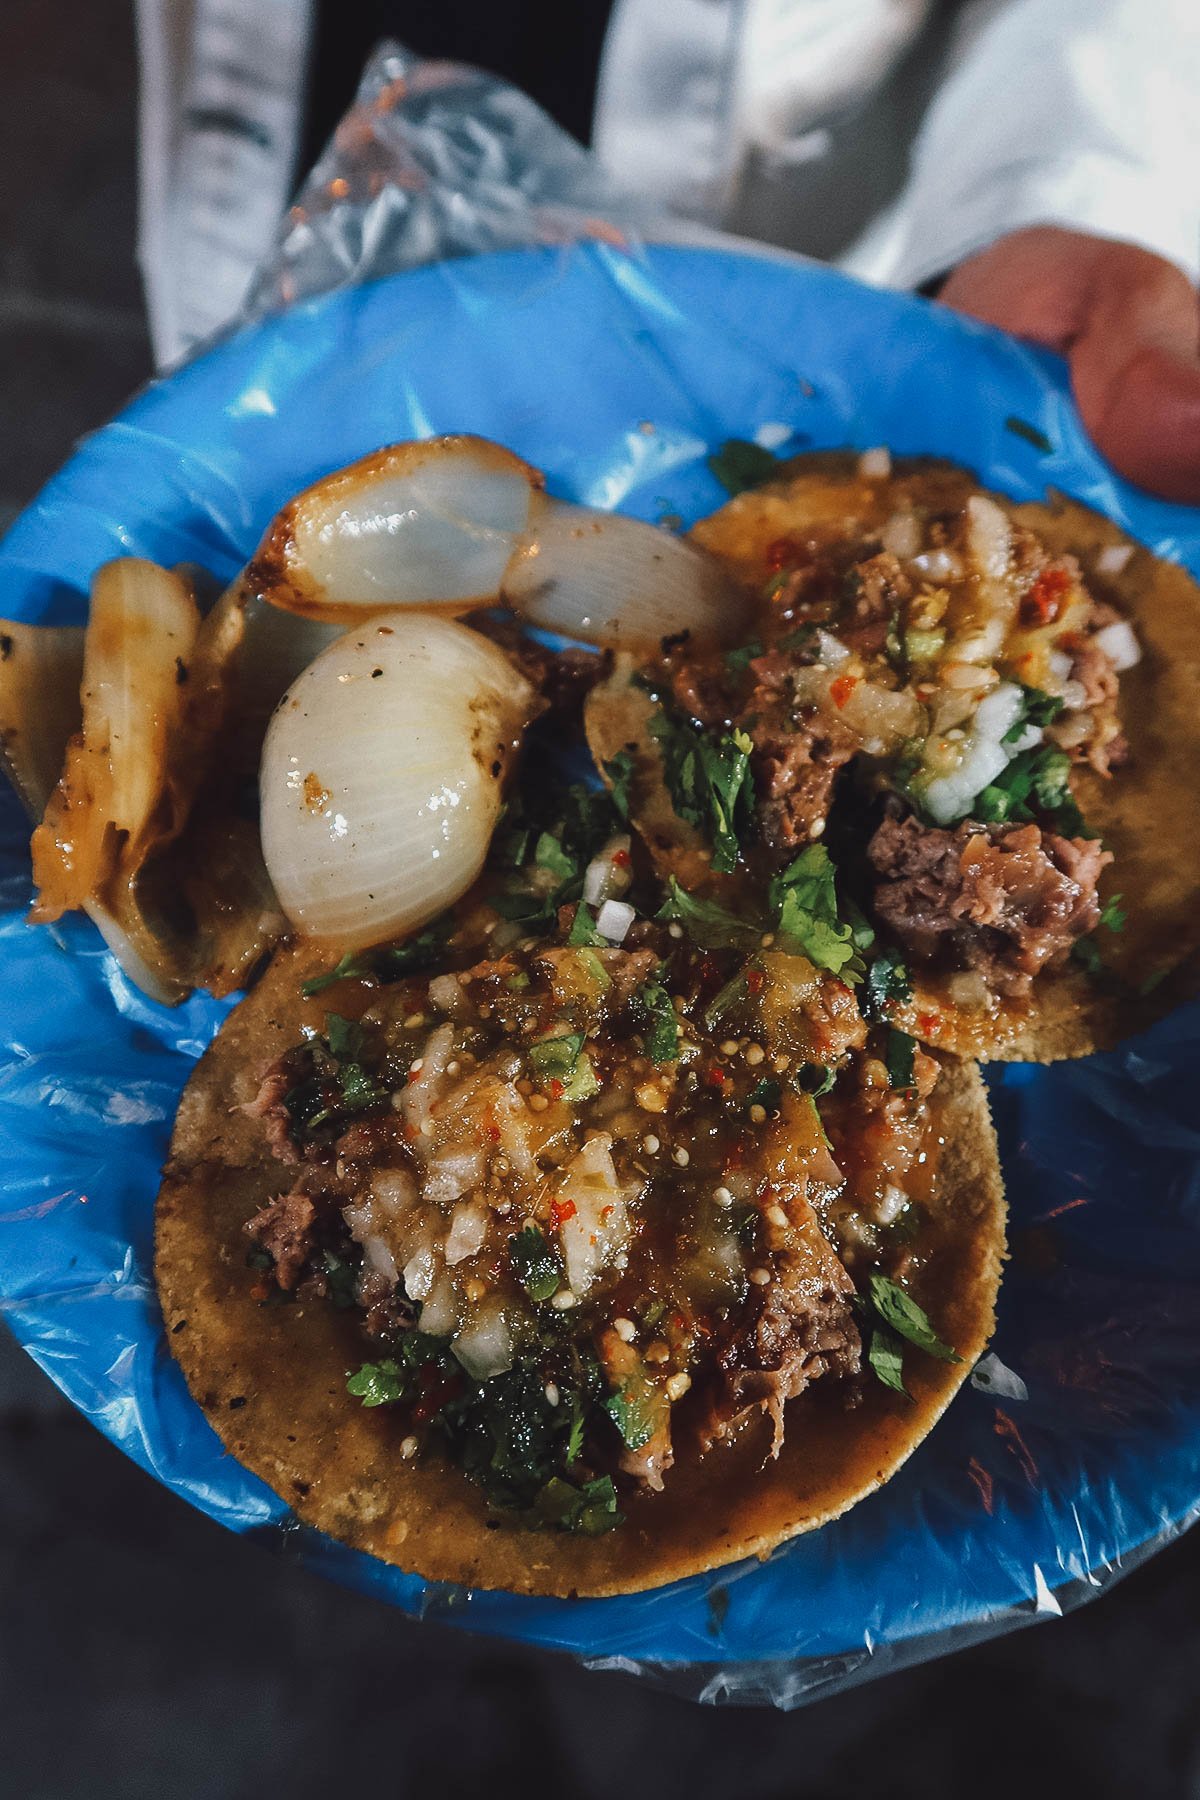 Plate of suadero tacos